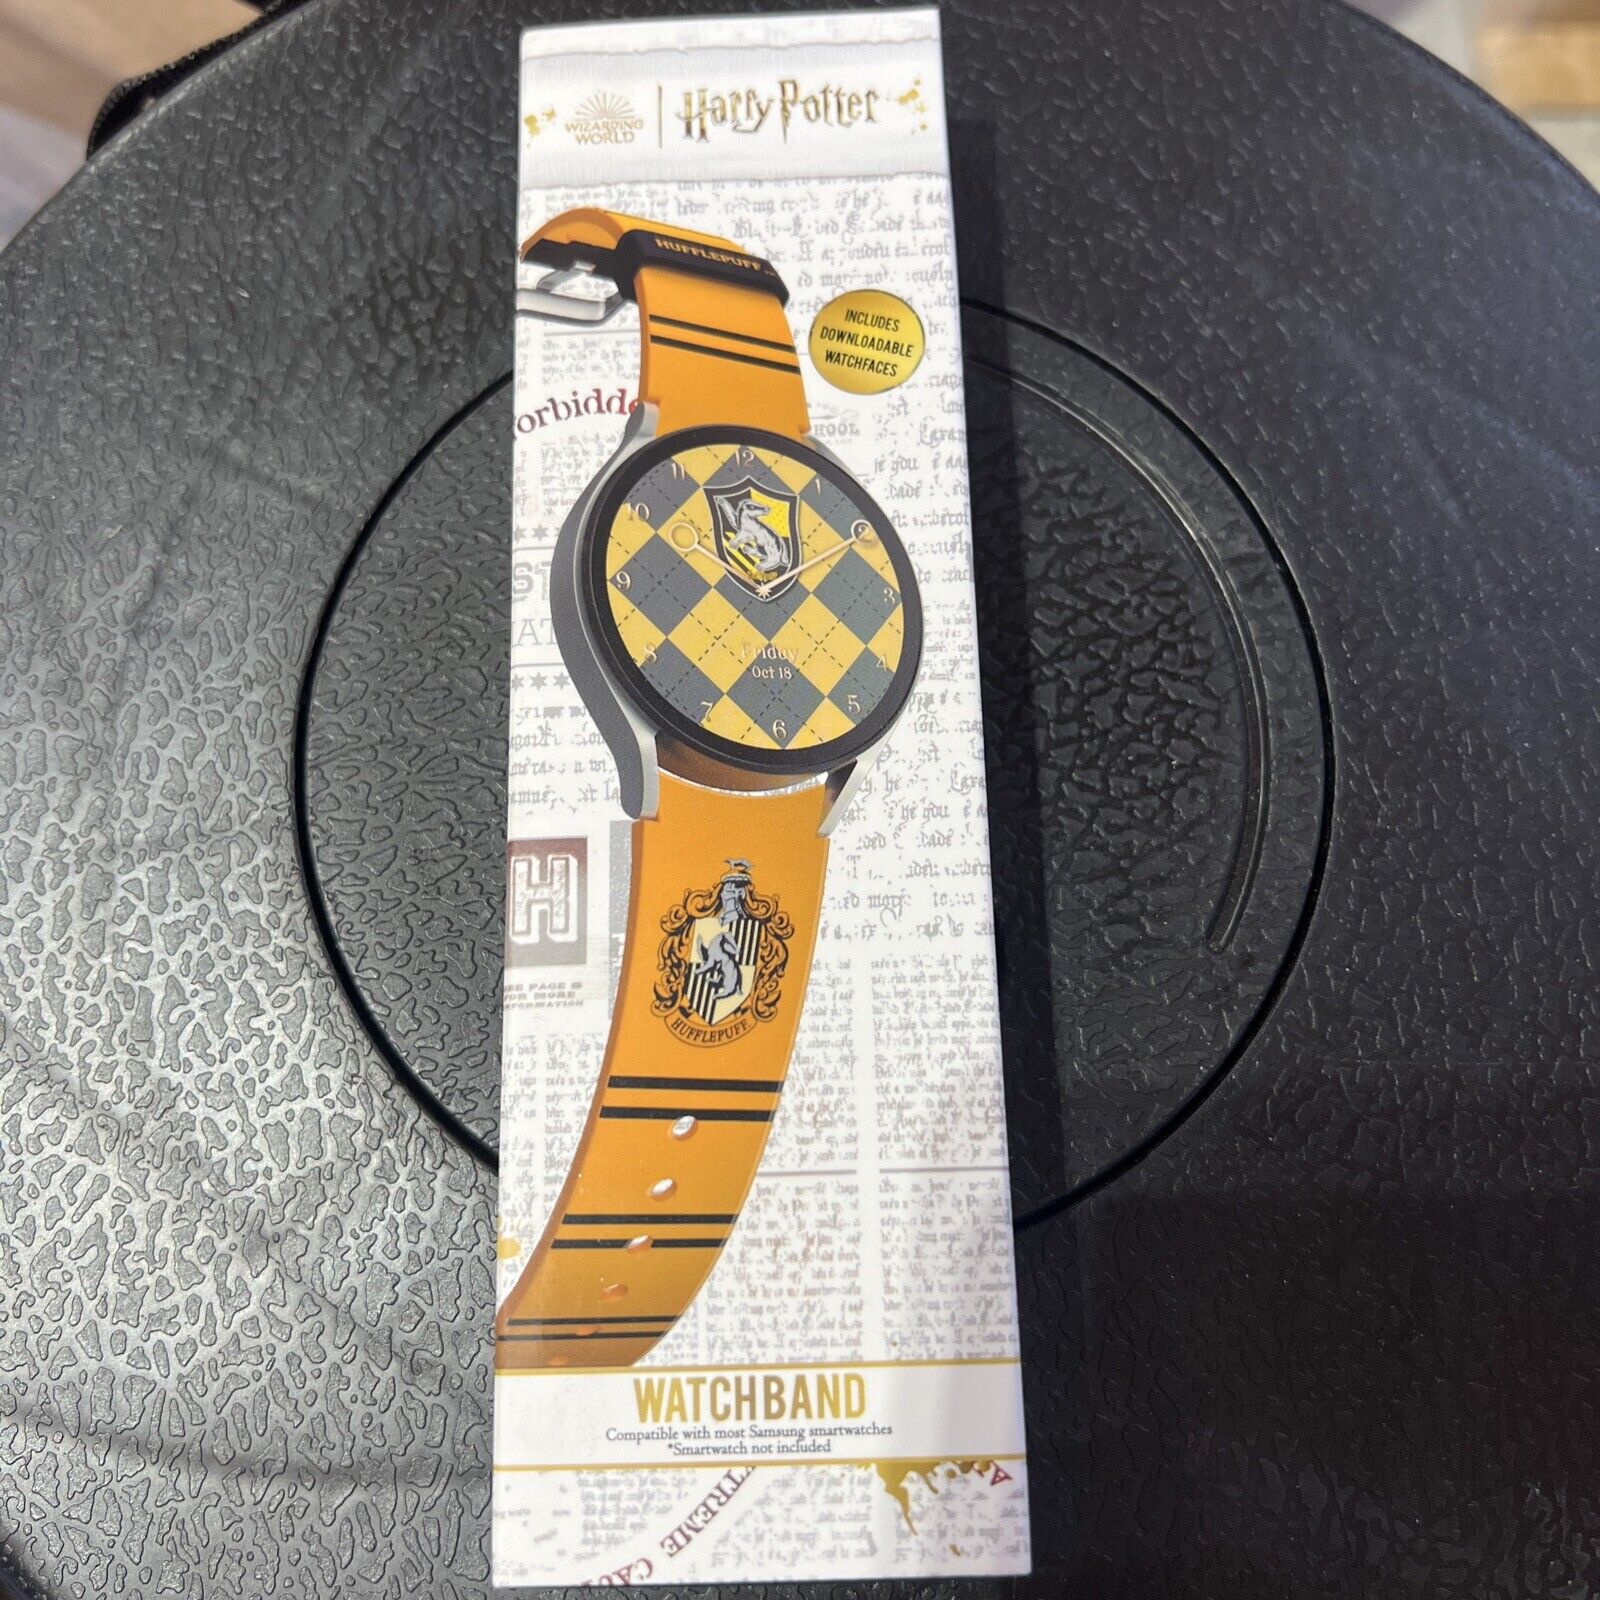 Harry Potter – Hufflepuff Samsung Smartwatch Band – Licensed 20mm BAND ONLY